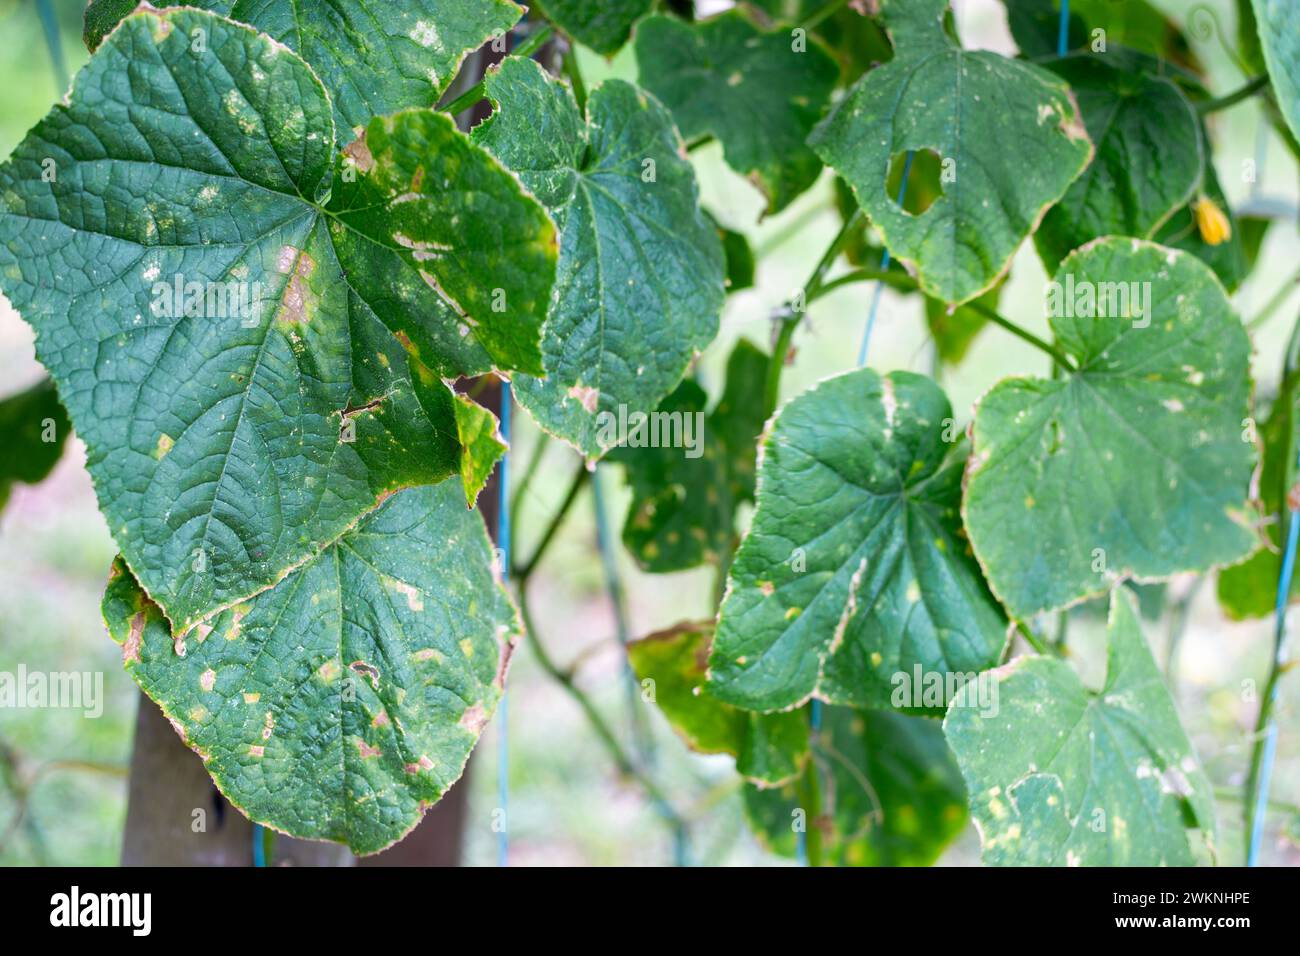 Leaves of a cucumber plant affected by cucumber mosaic disease. Growing vegetables and spraying against diseases. Stock Photo